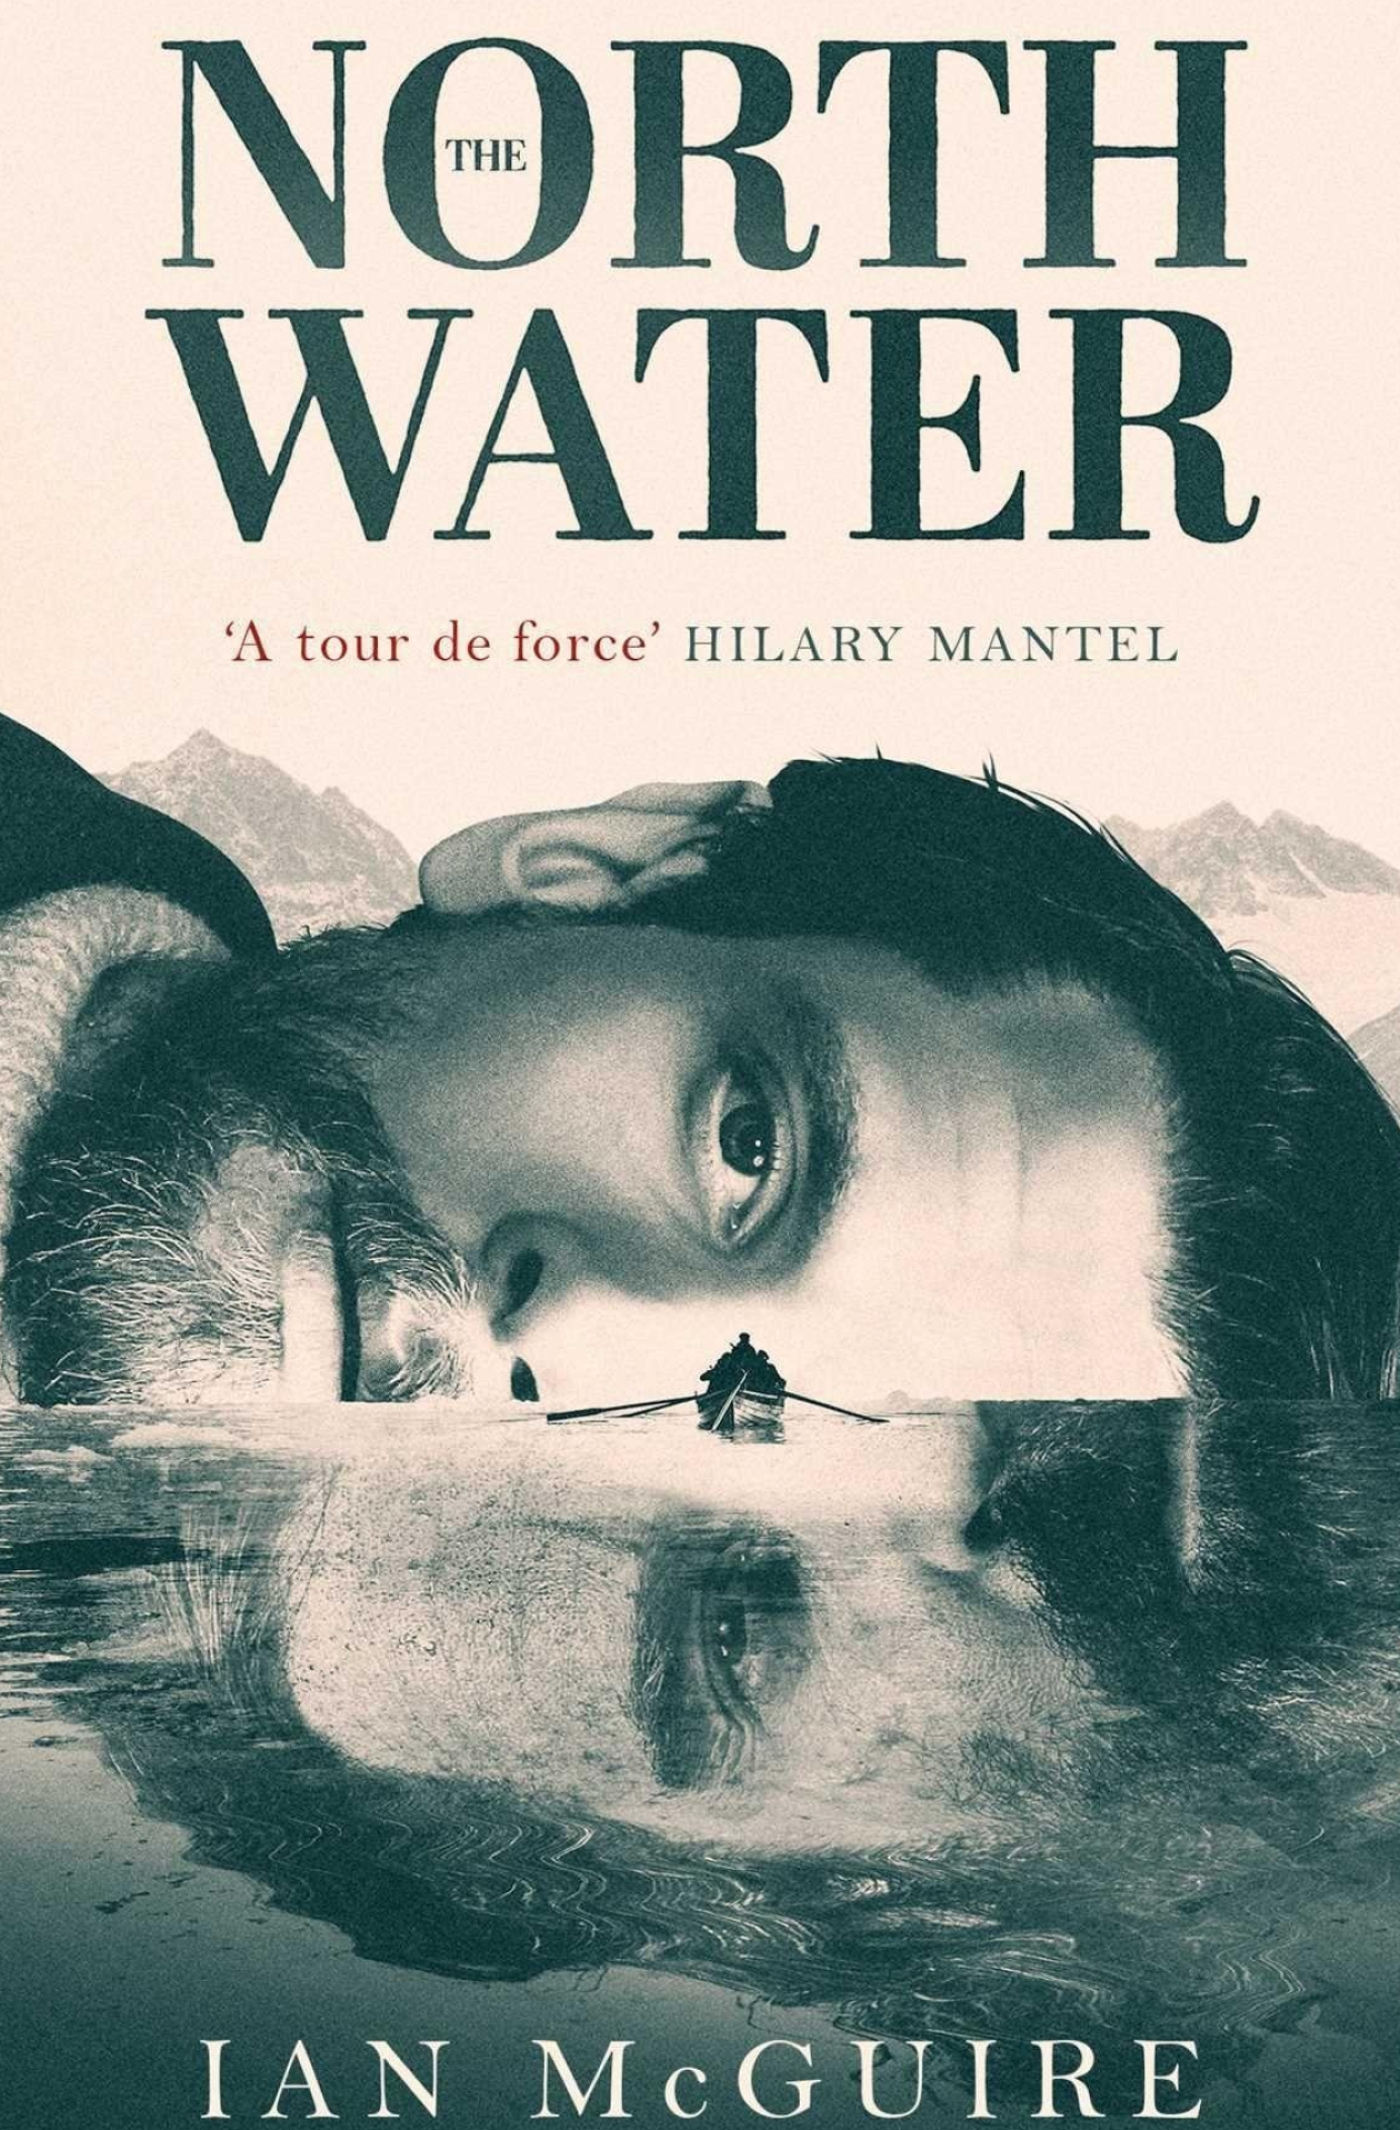 The North Water, TV Series, TV Shows, Buch, 1400x2130 HD Handy